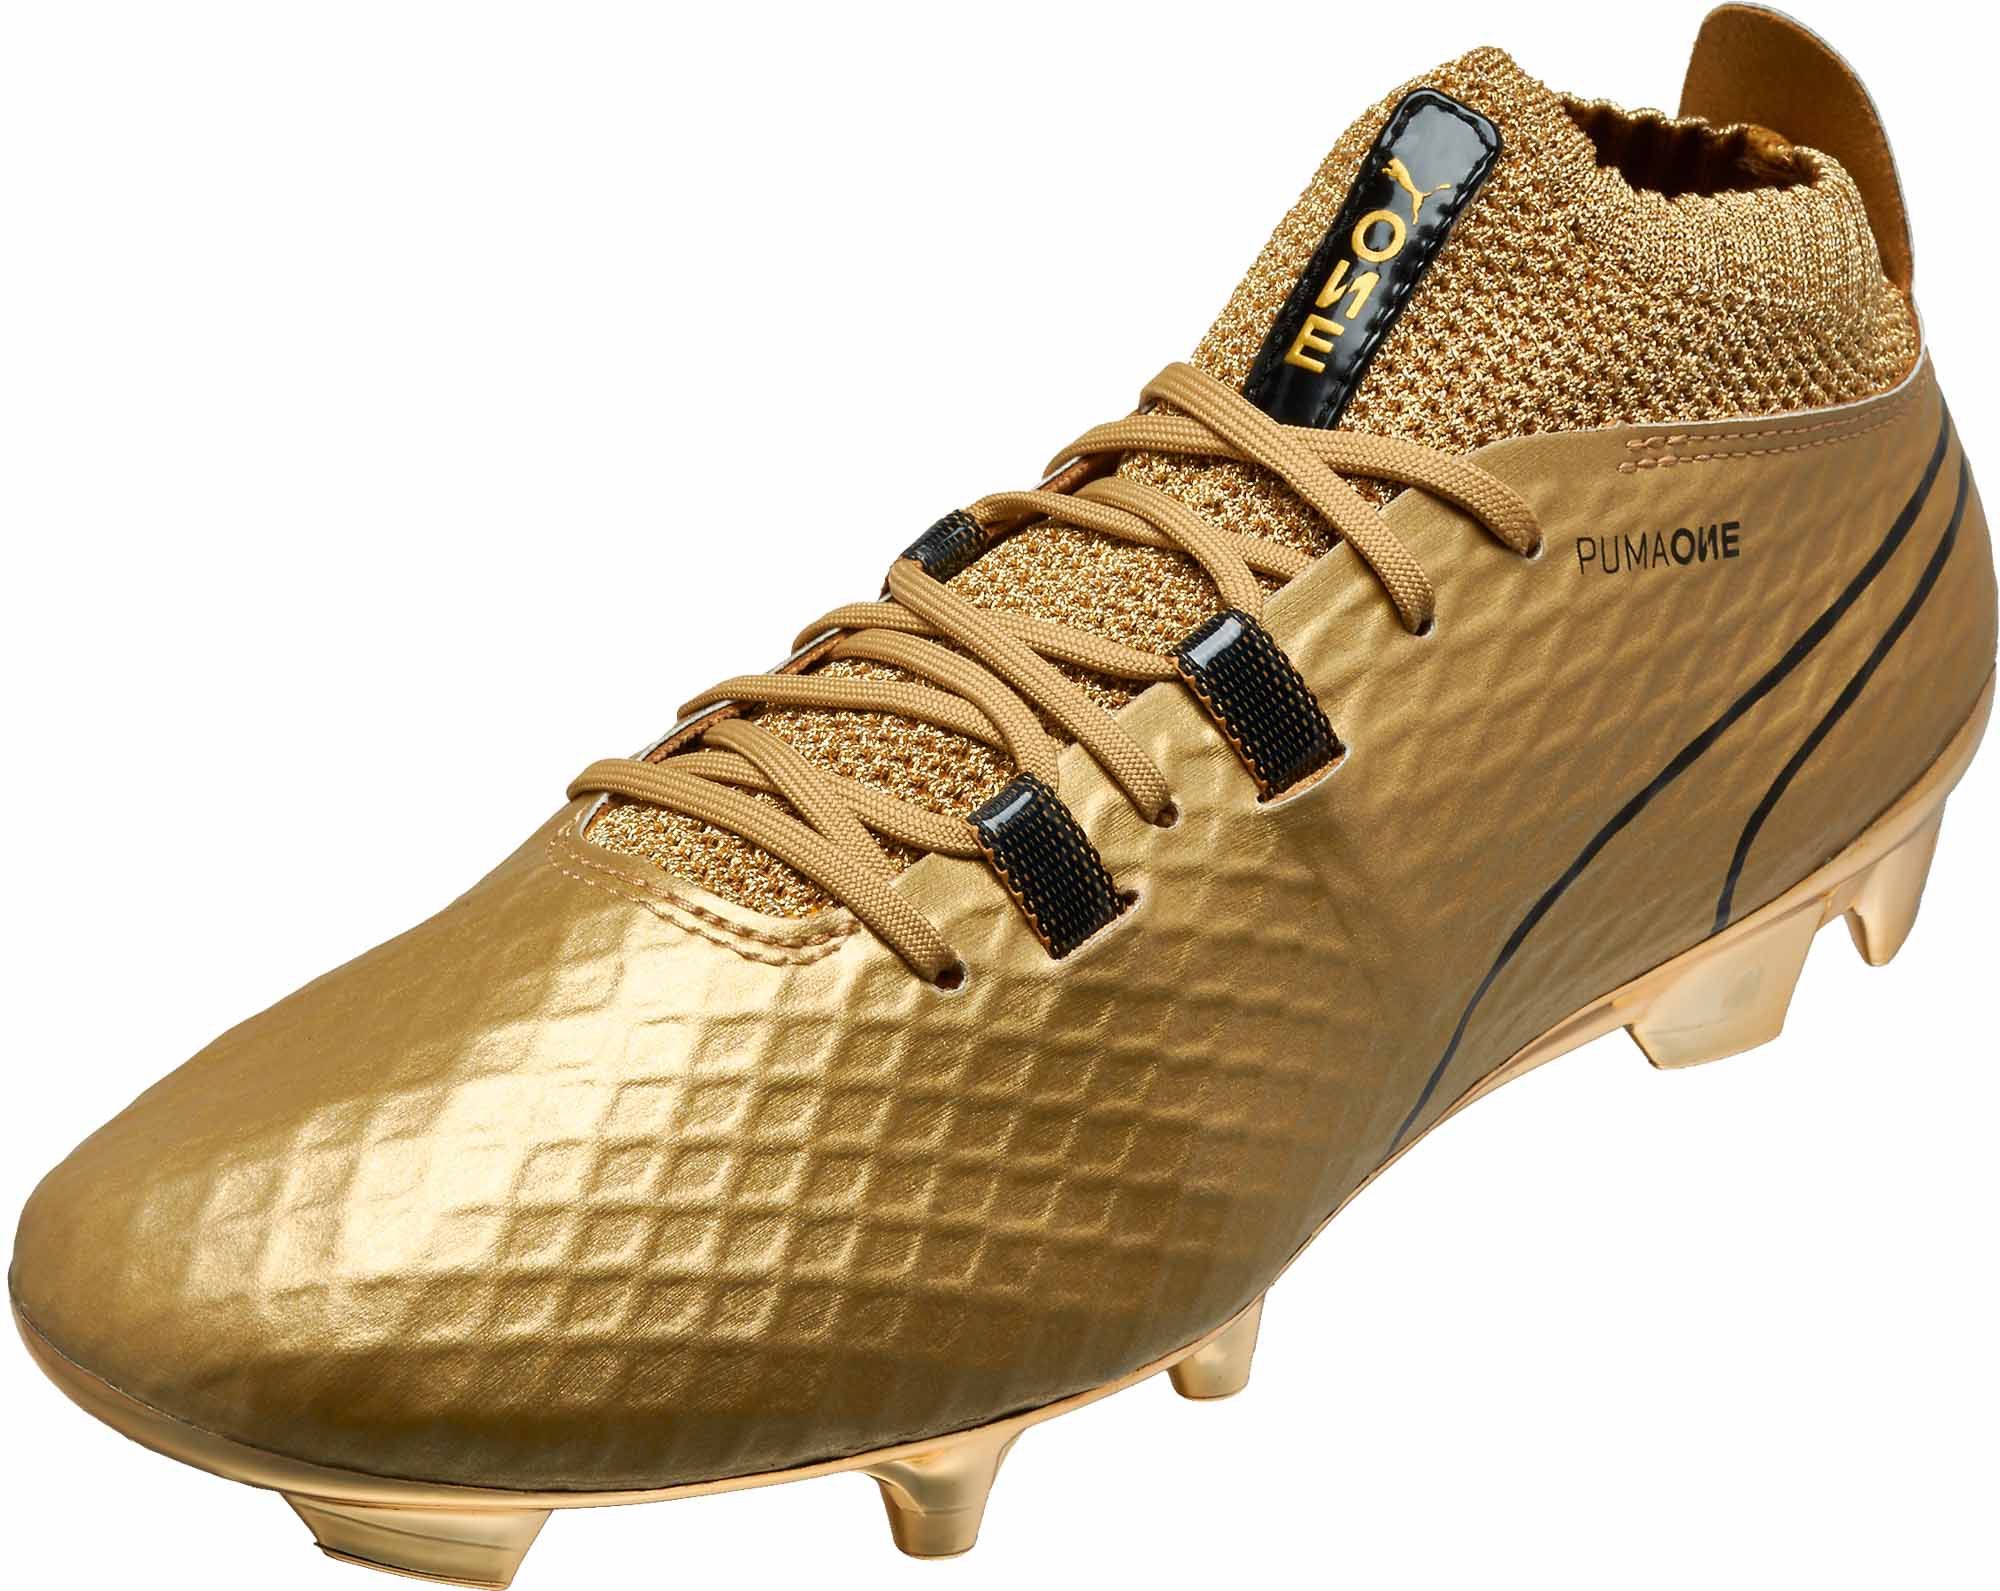 puma one gold cleats - 59% remise - www 